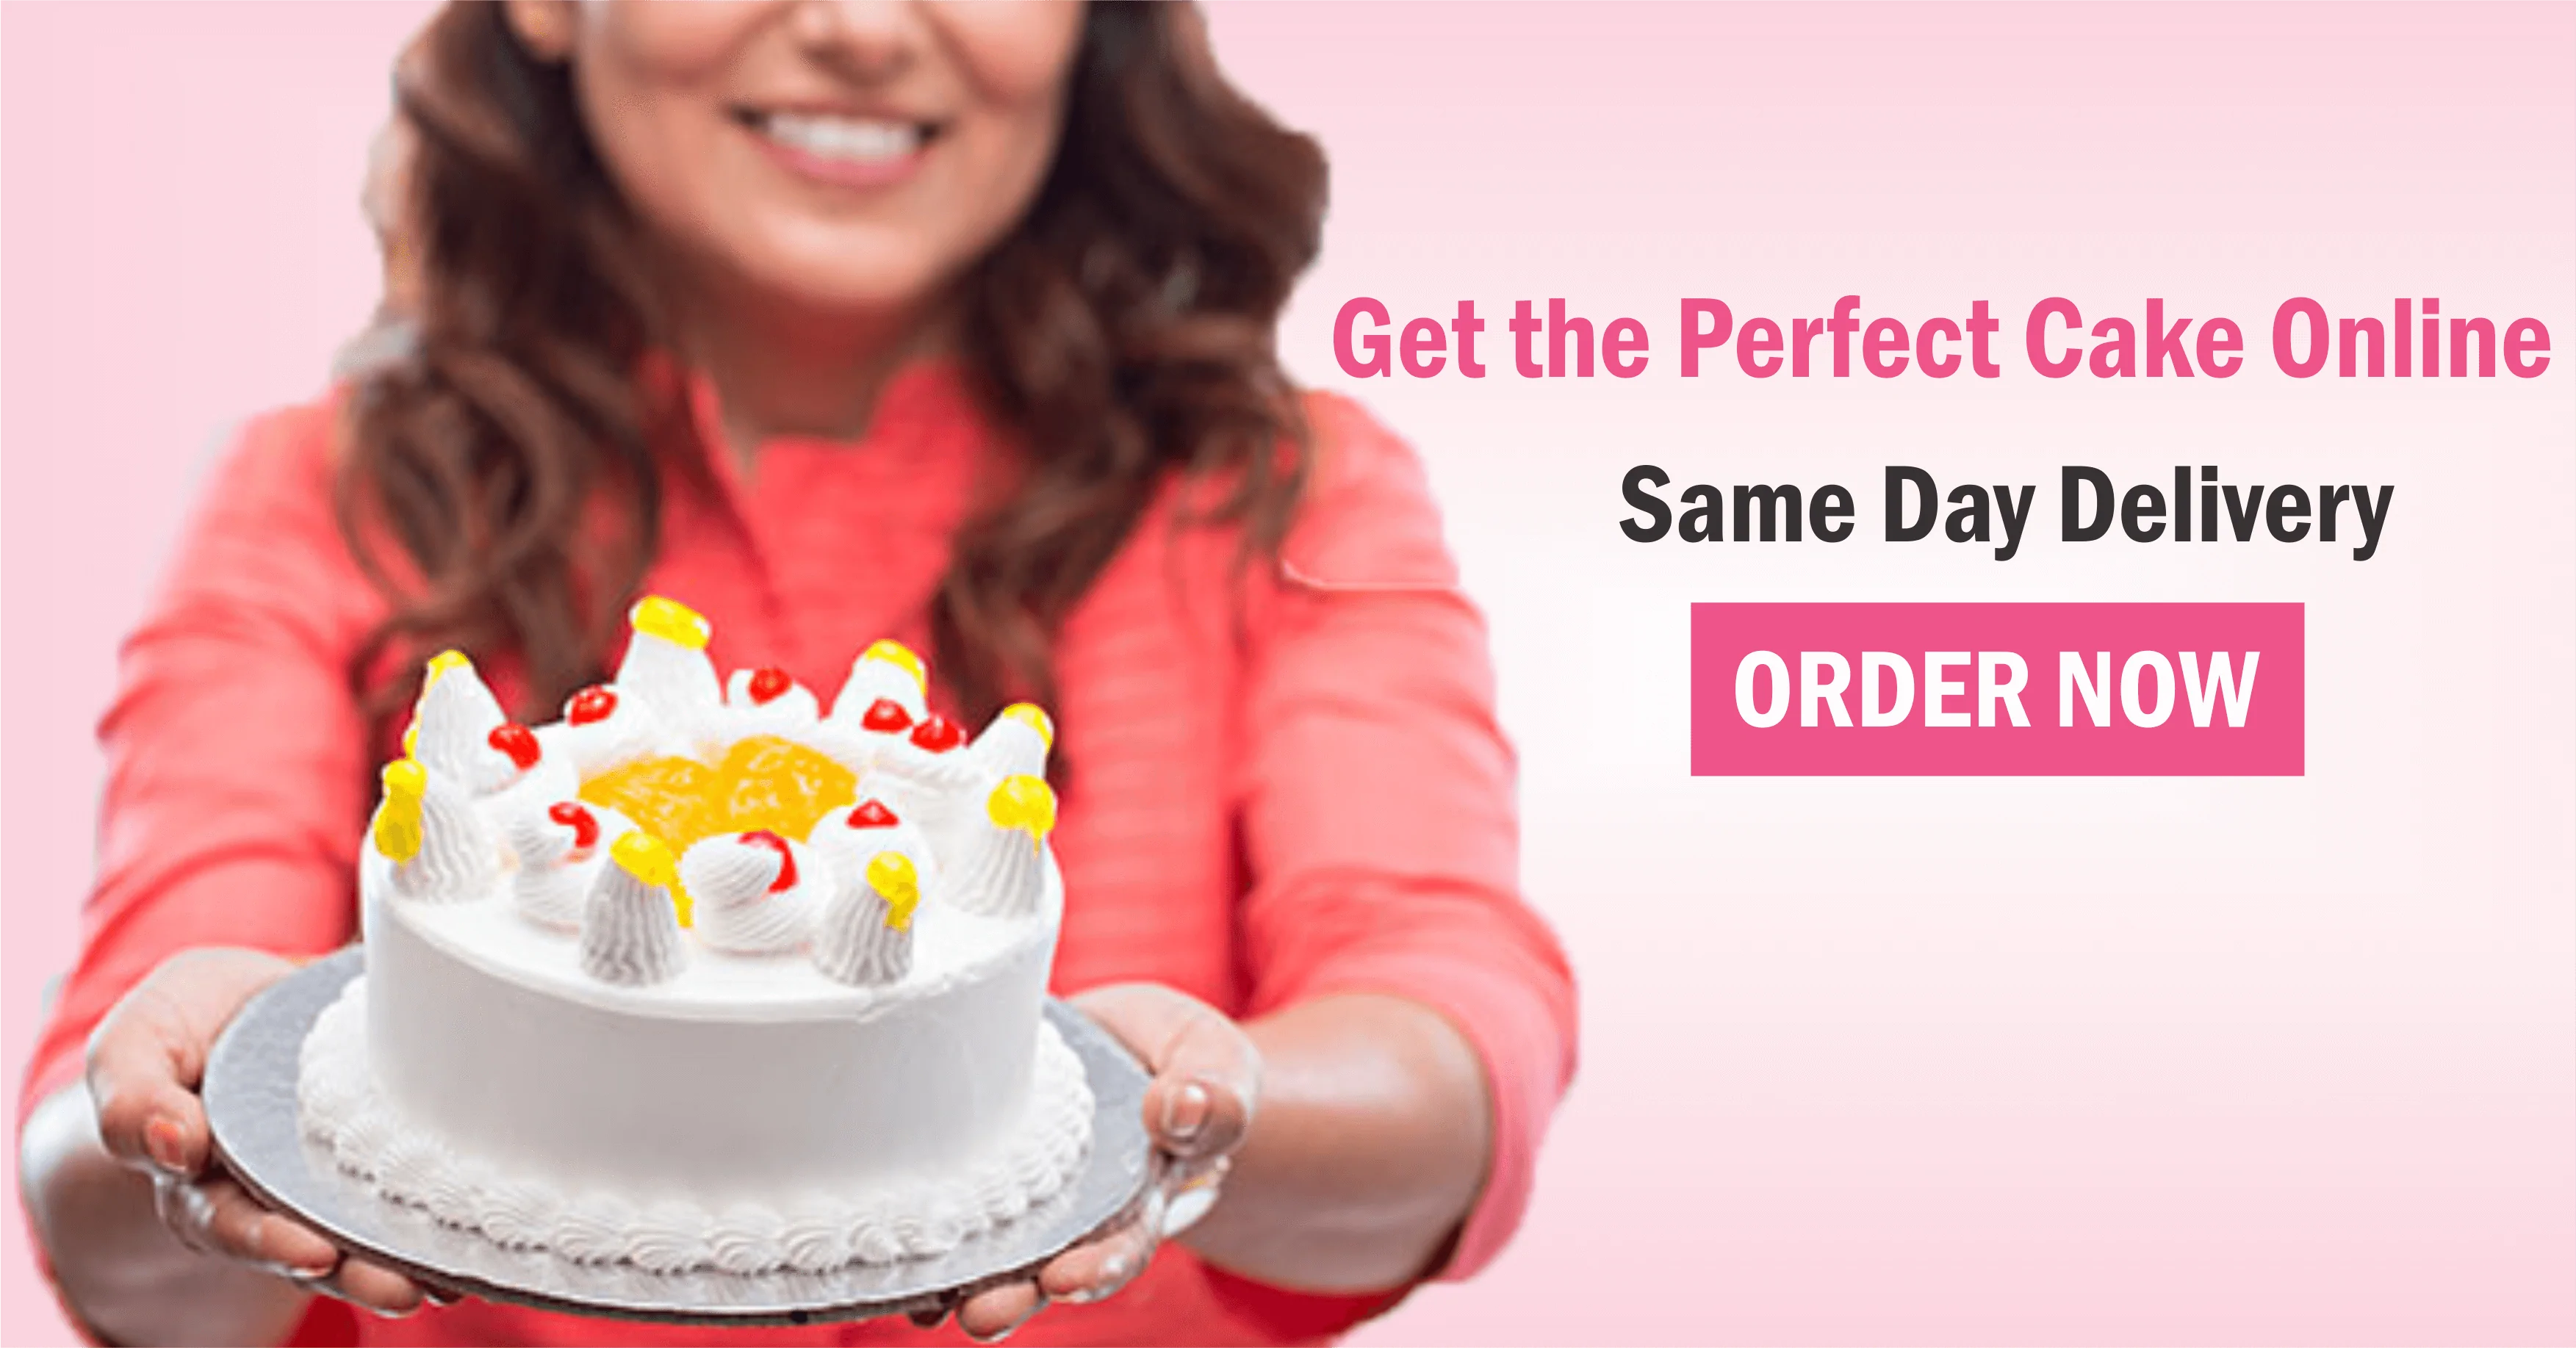 What Is the Reason to Pick an Online Cake Delivery?